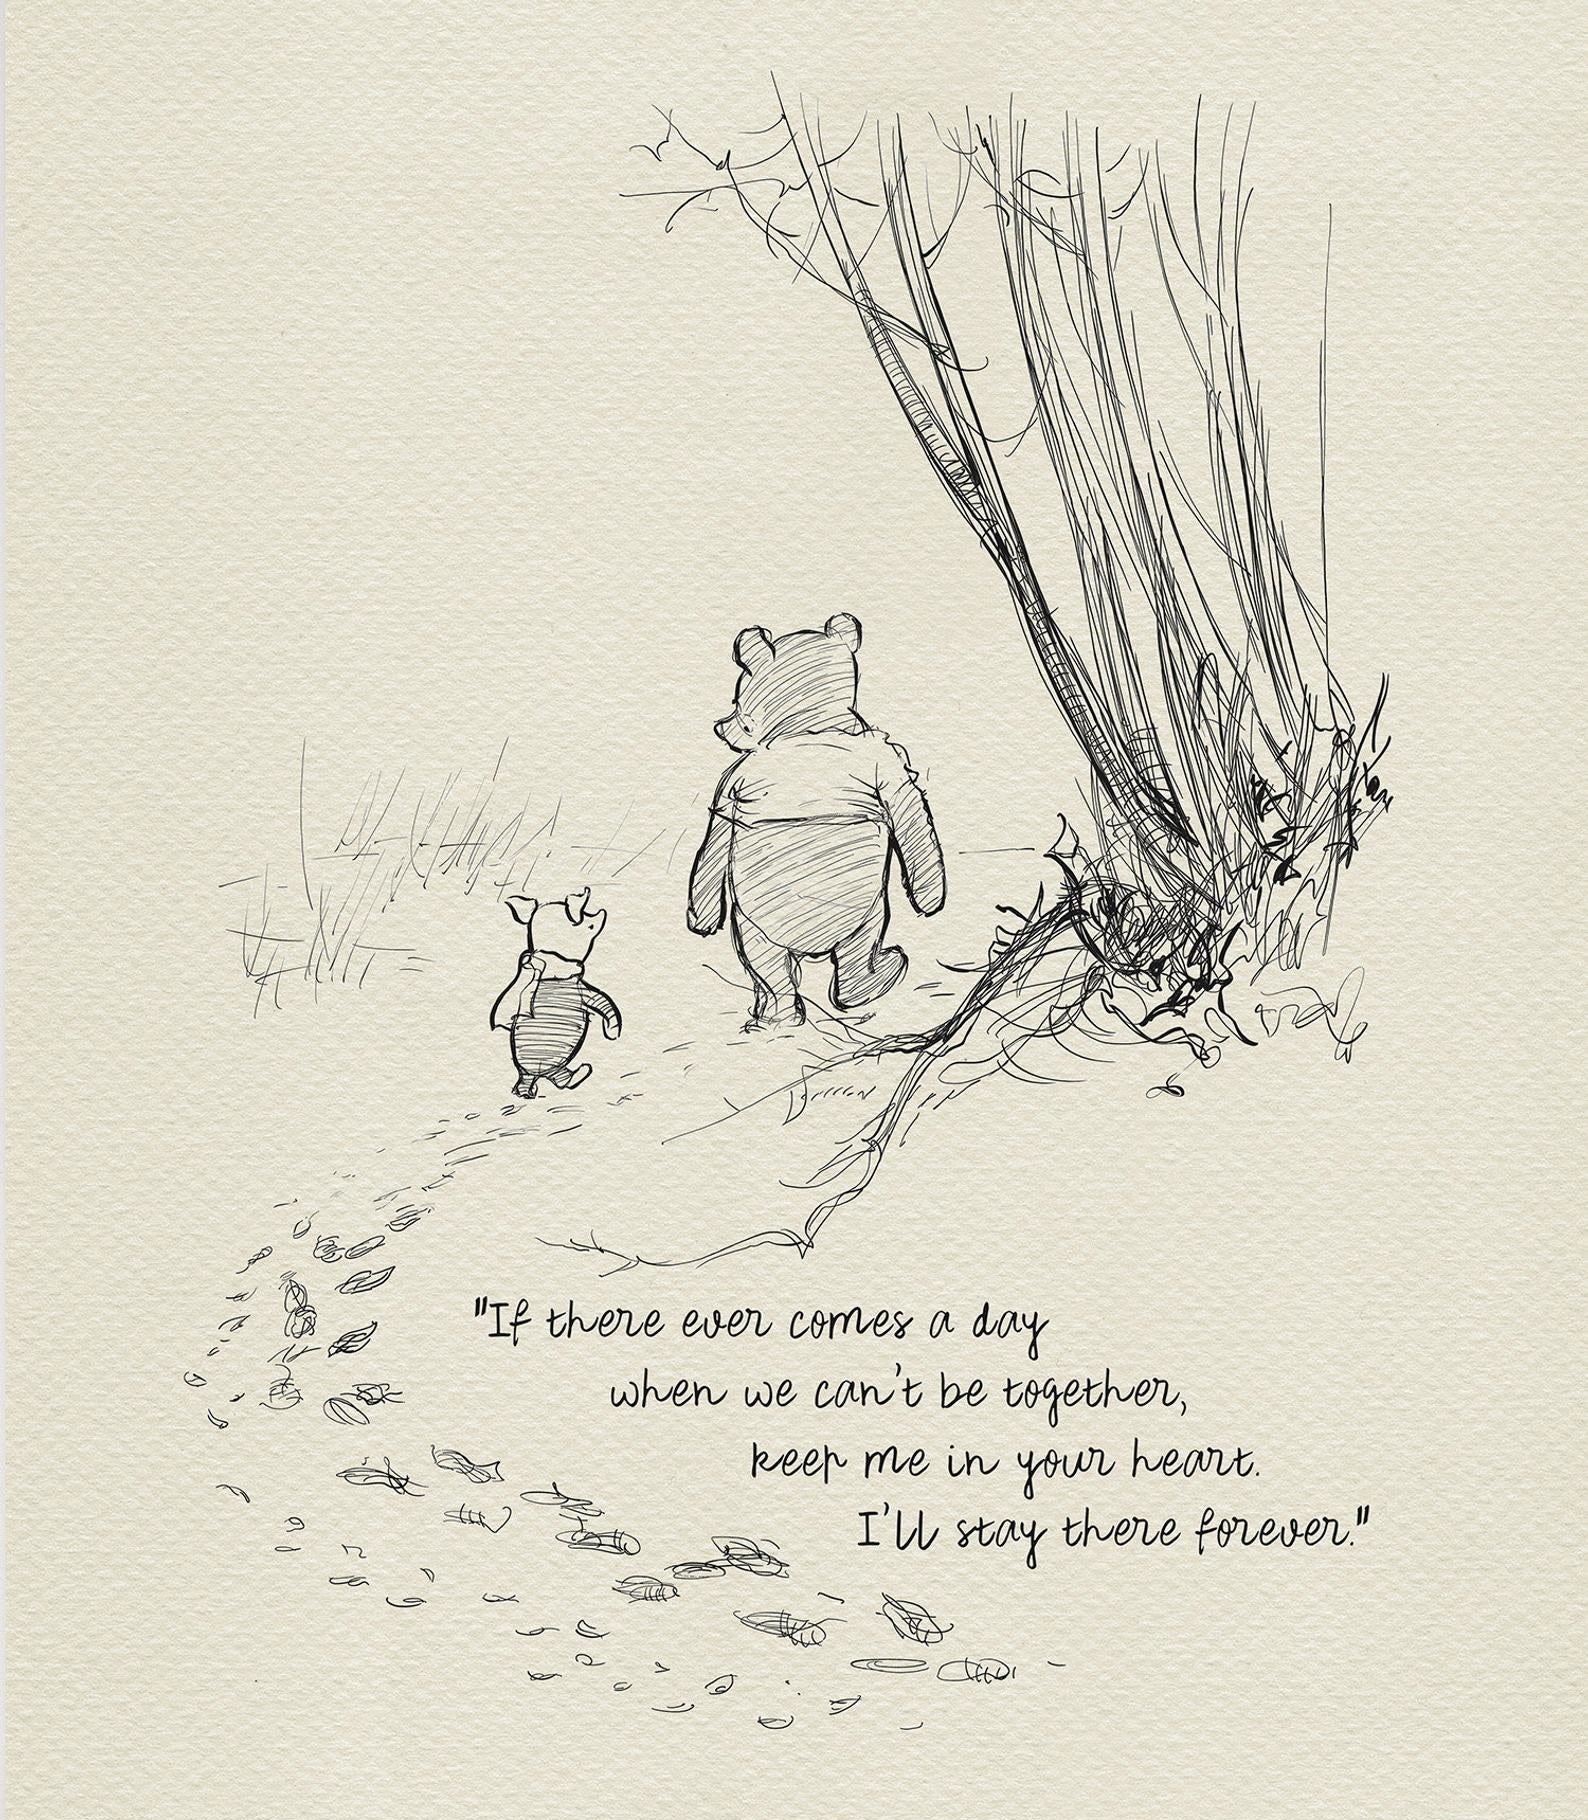 the print, which shows Pooh and Piglet walking in the woods